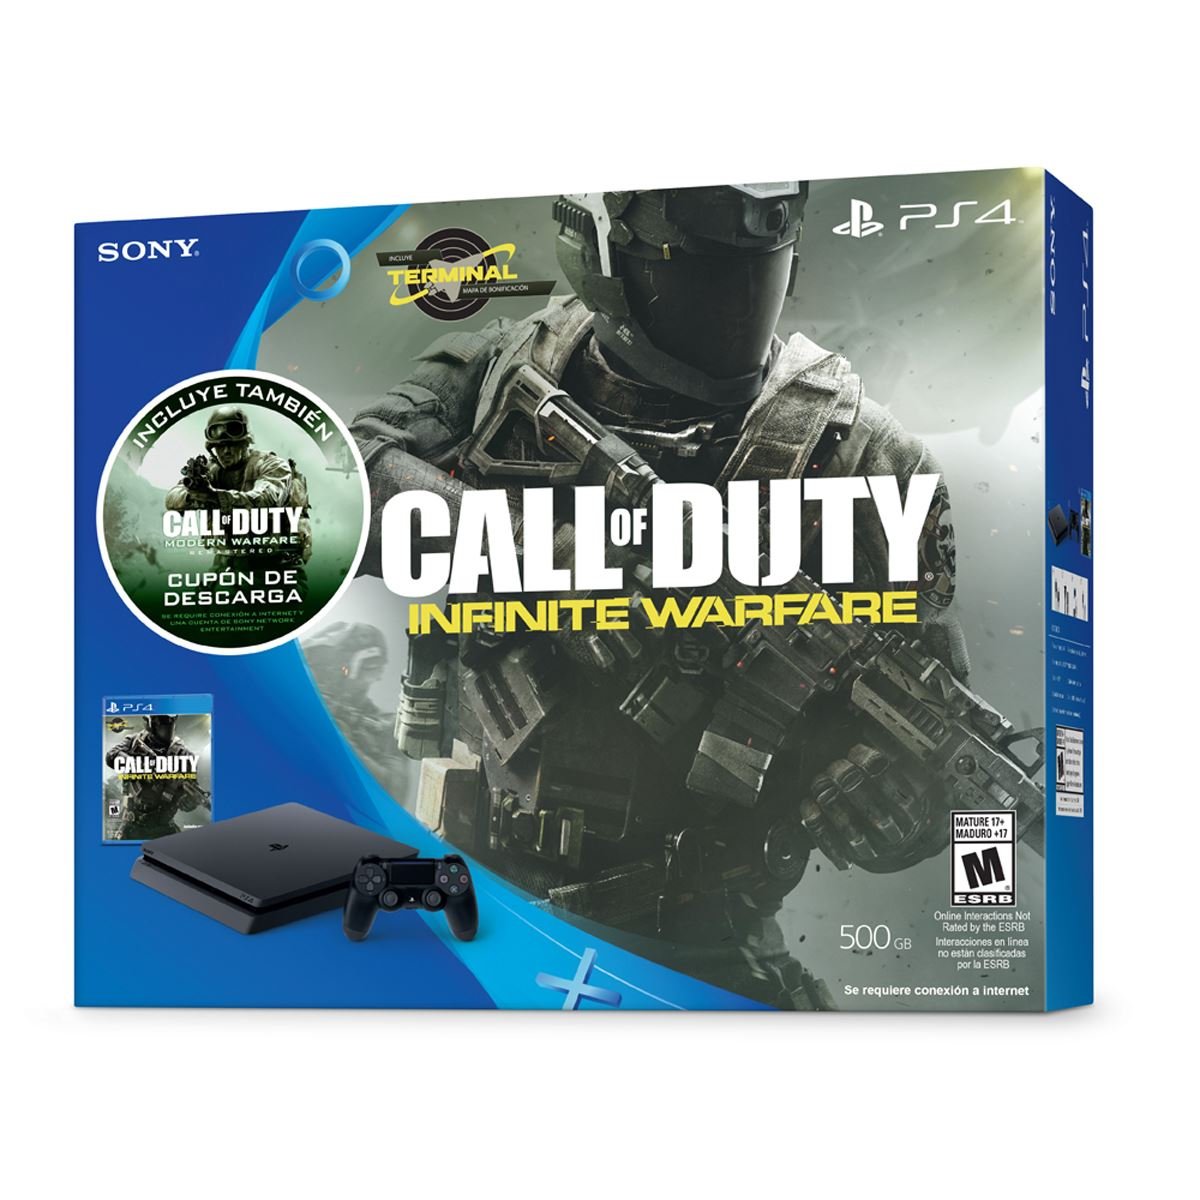 Consola PS4 Call of Duty